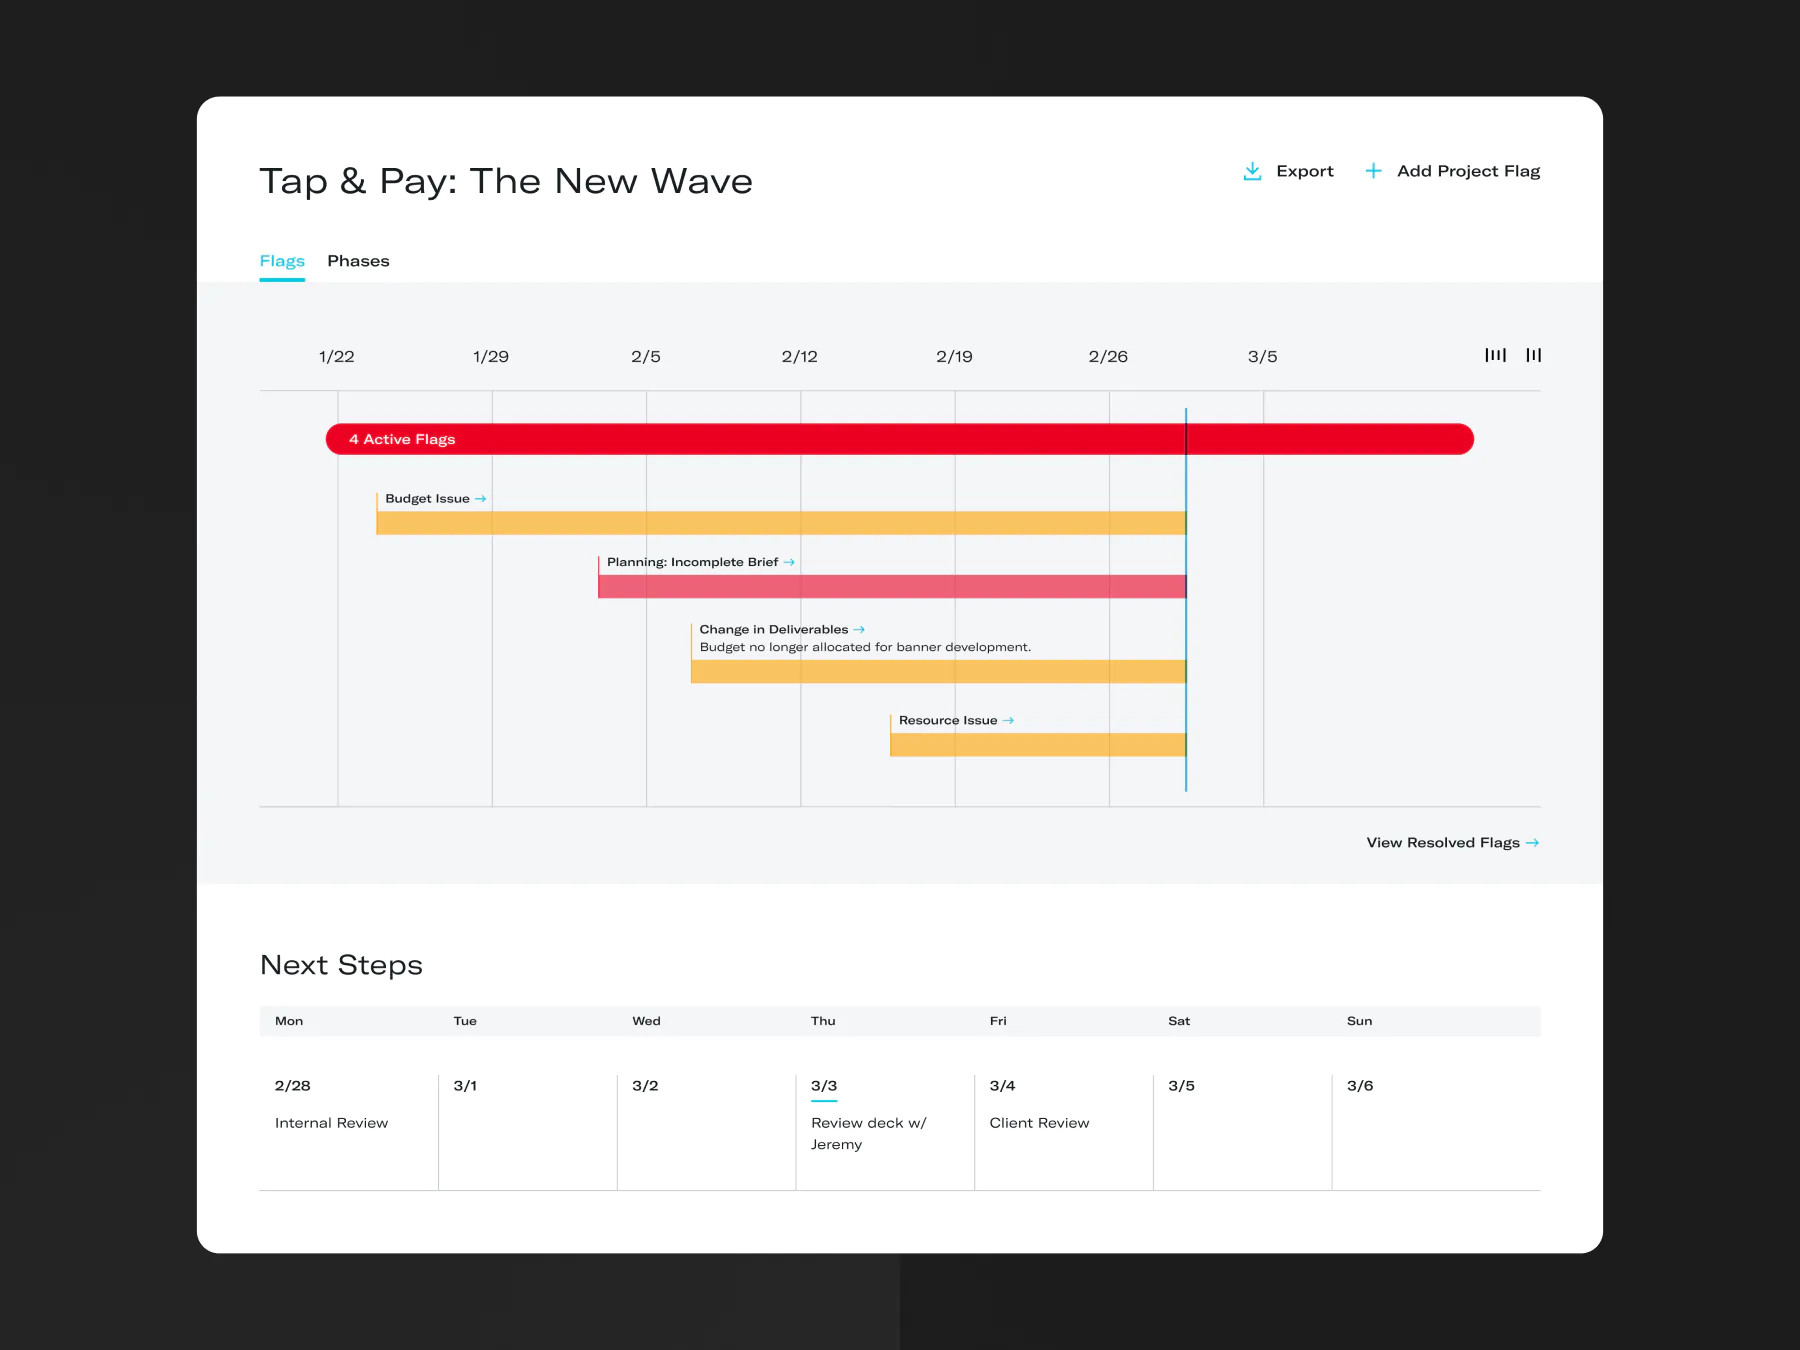 Project management dashboard showing flags, phases, and upcoming steps for a Tap & Pay campaign.